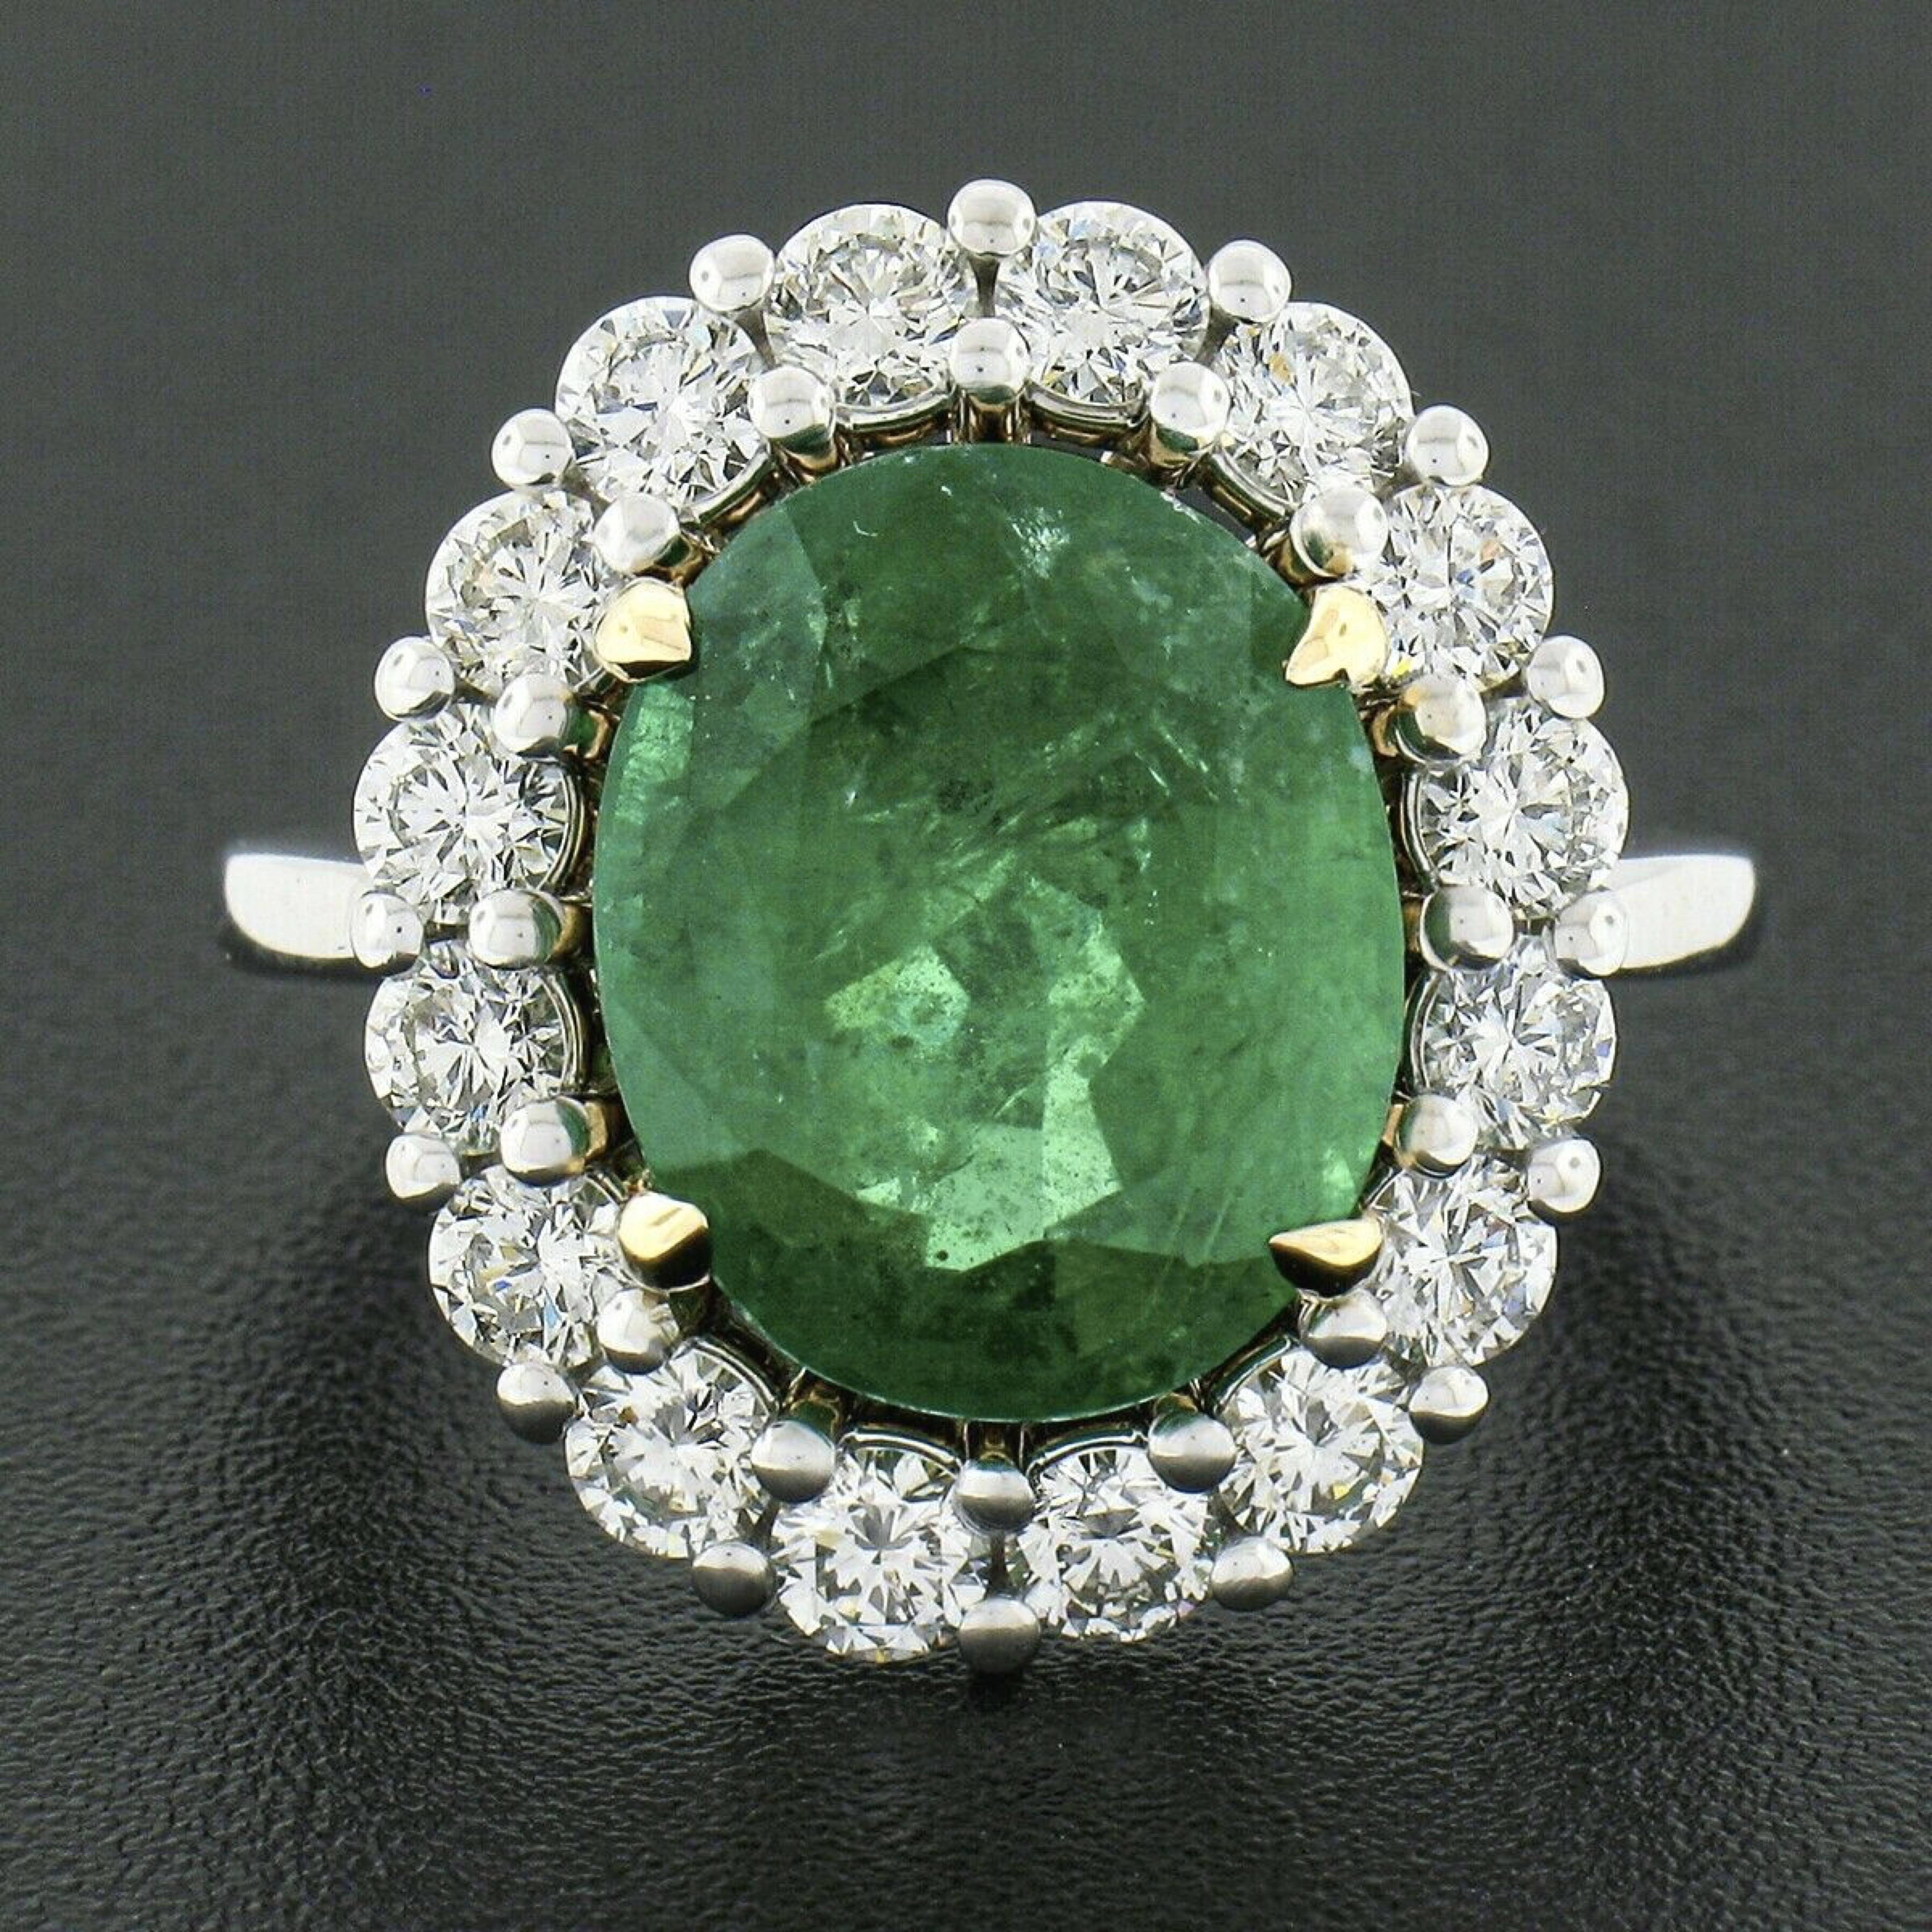 Oval Cut New 18k TT Gold 7.94ct GIA Oval Emerald w/ Diamond Halo Engagement Cocktail Ring